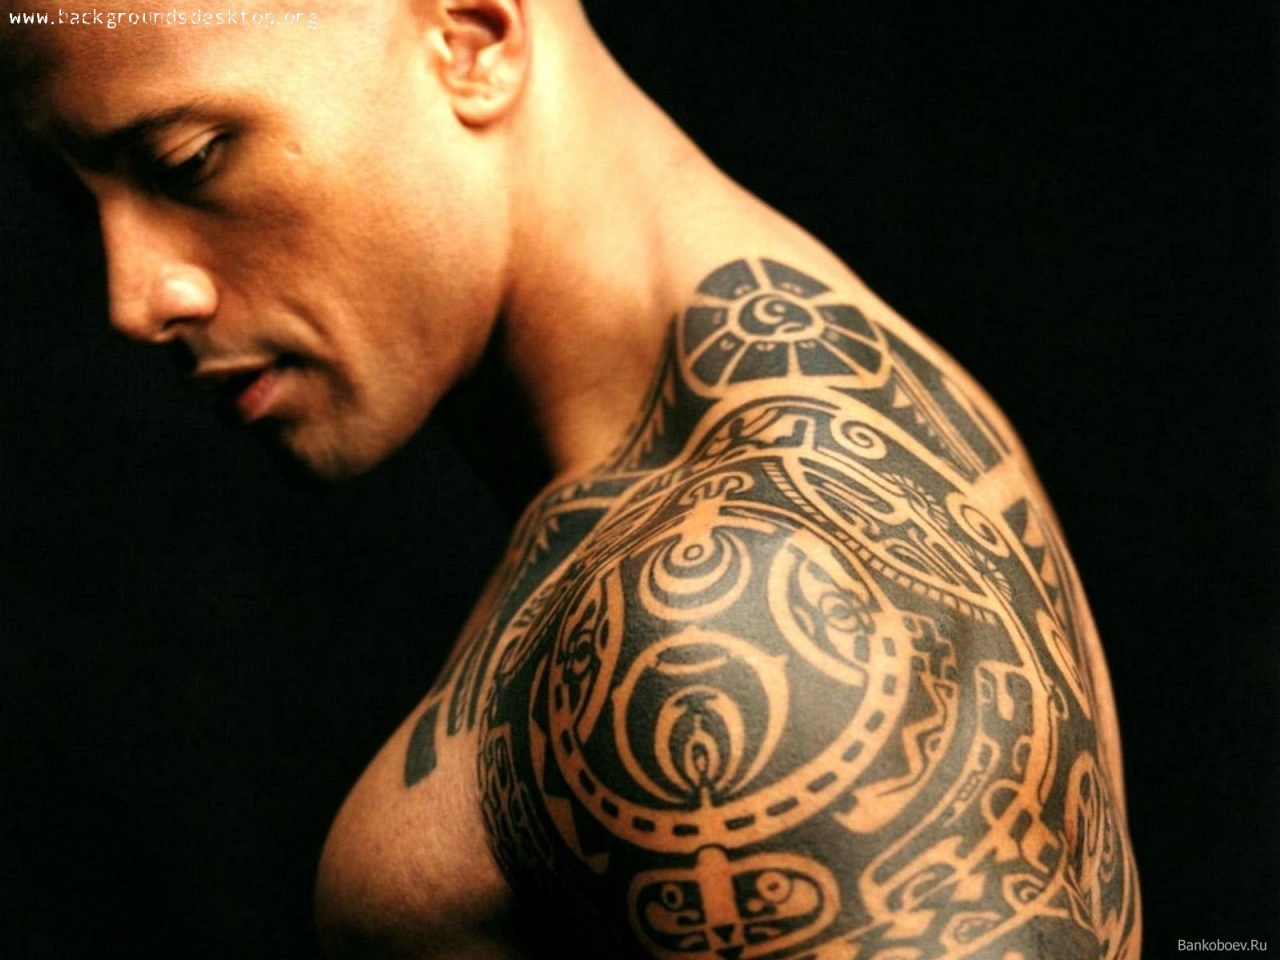 The Rocks Tattoo Design On Shoulder Tattoomagz Tattoo Designs intended for size 1280 X 960